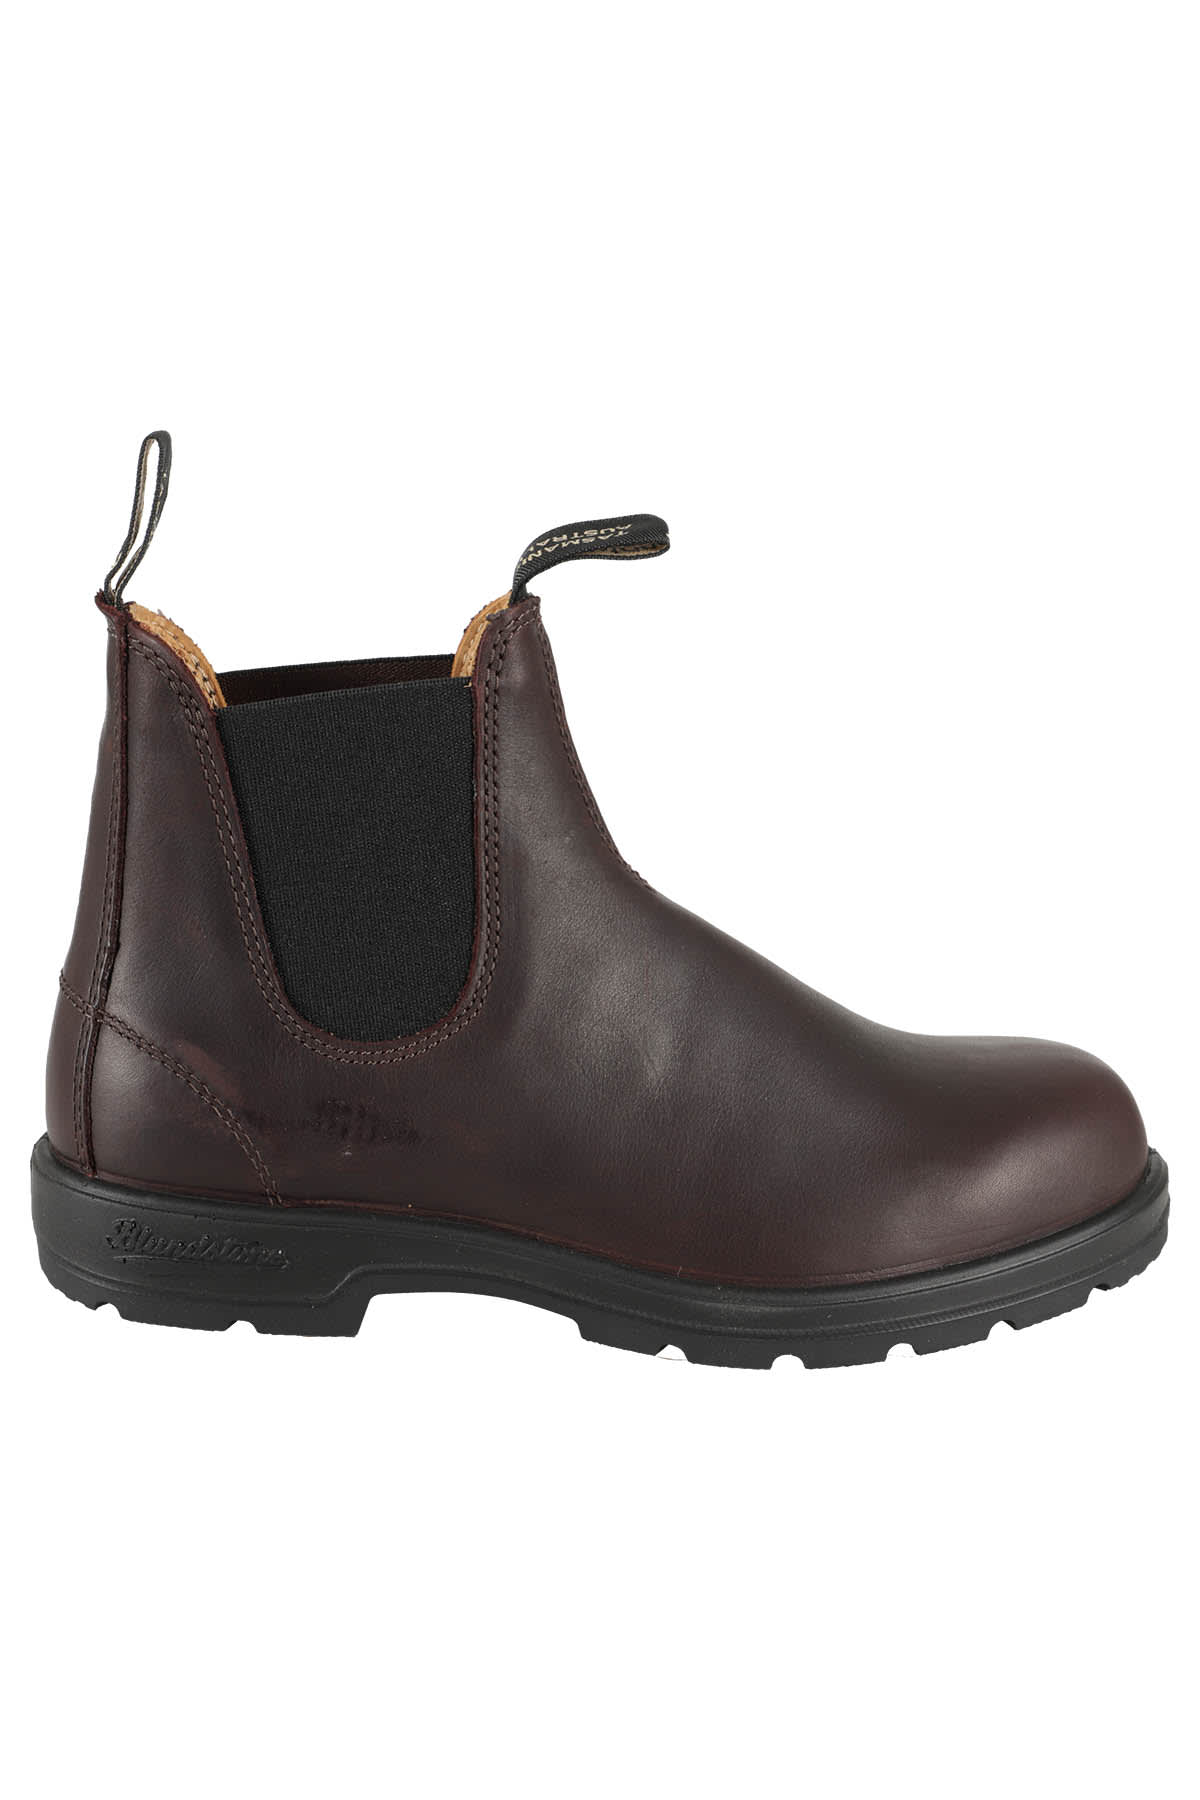 Blundstone Leather